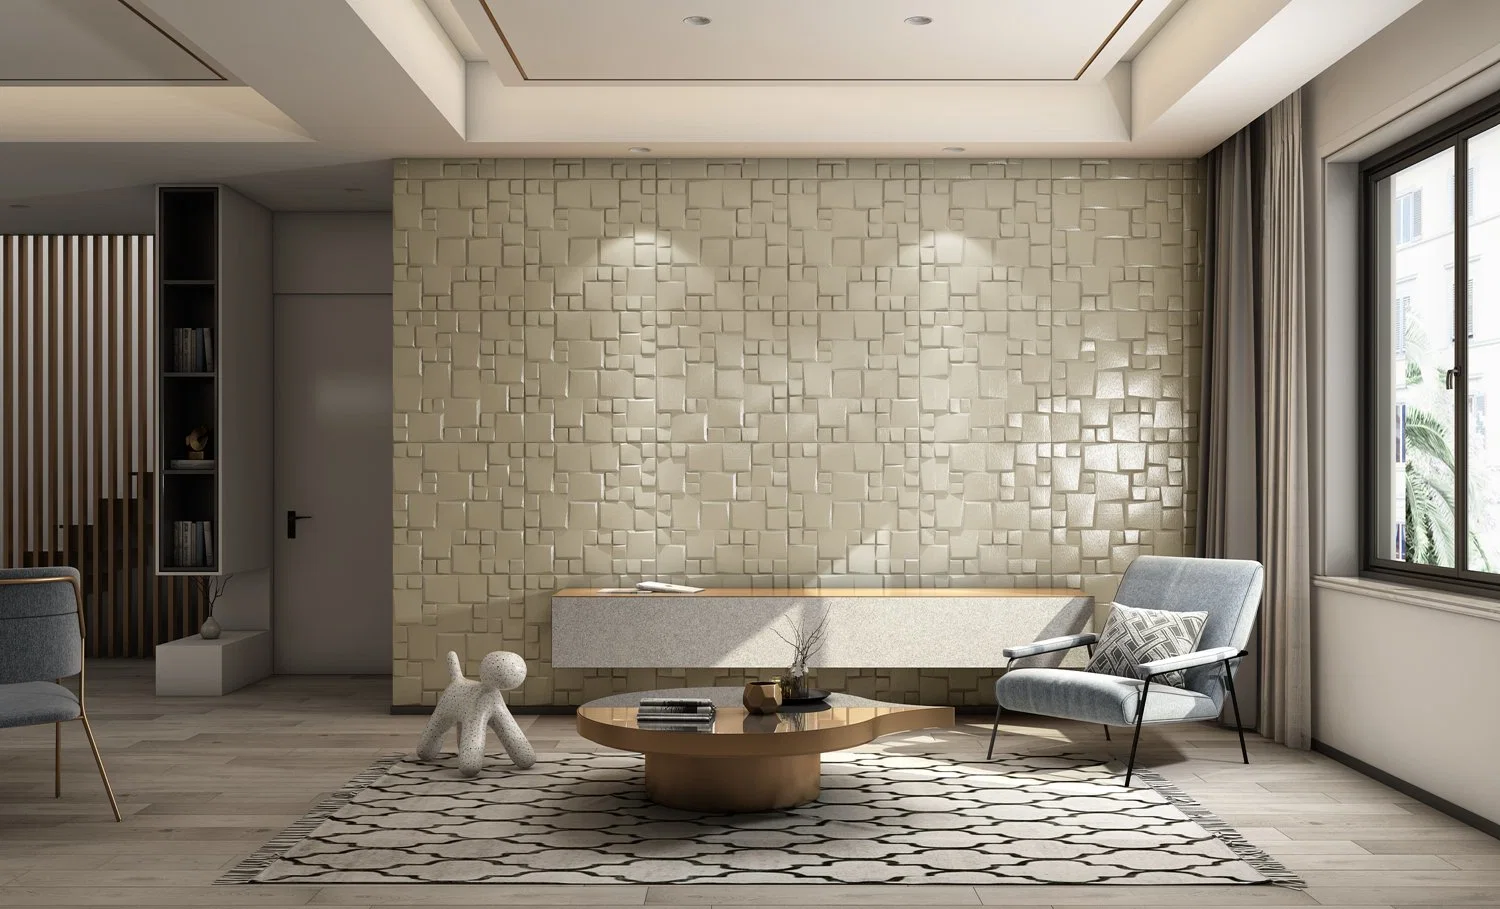 3D Art Decorative Leather Wall Panel Feature 3D Wall Tile